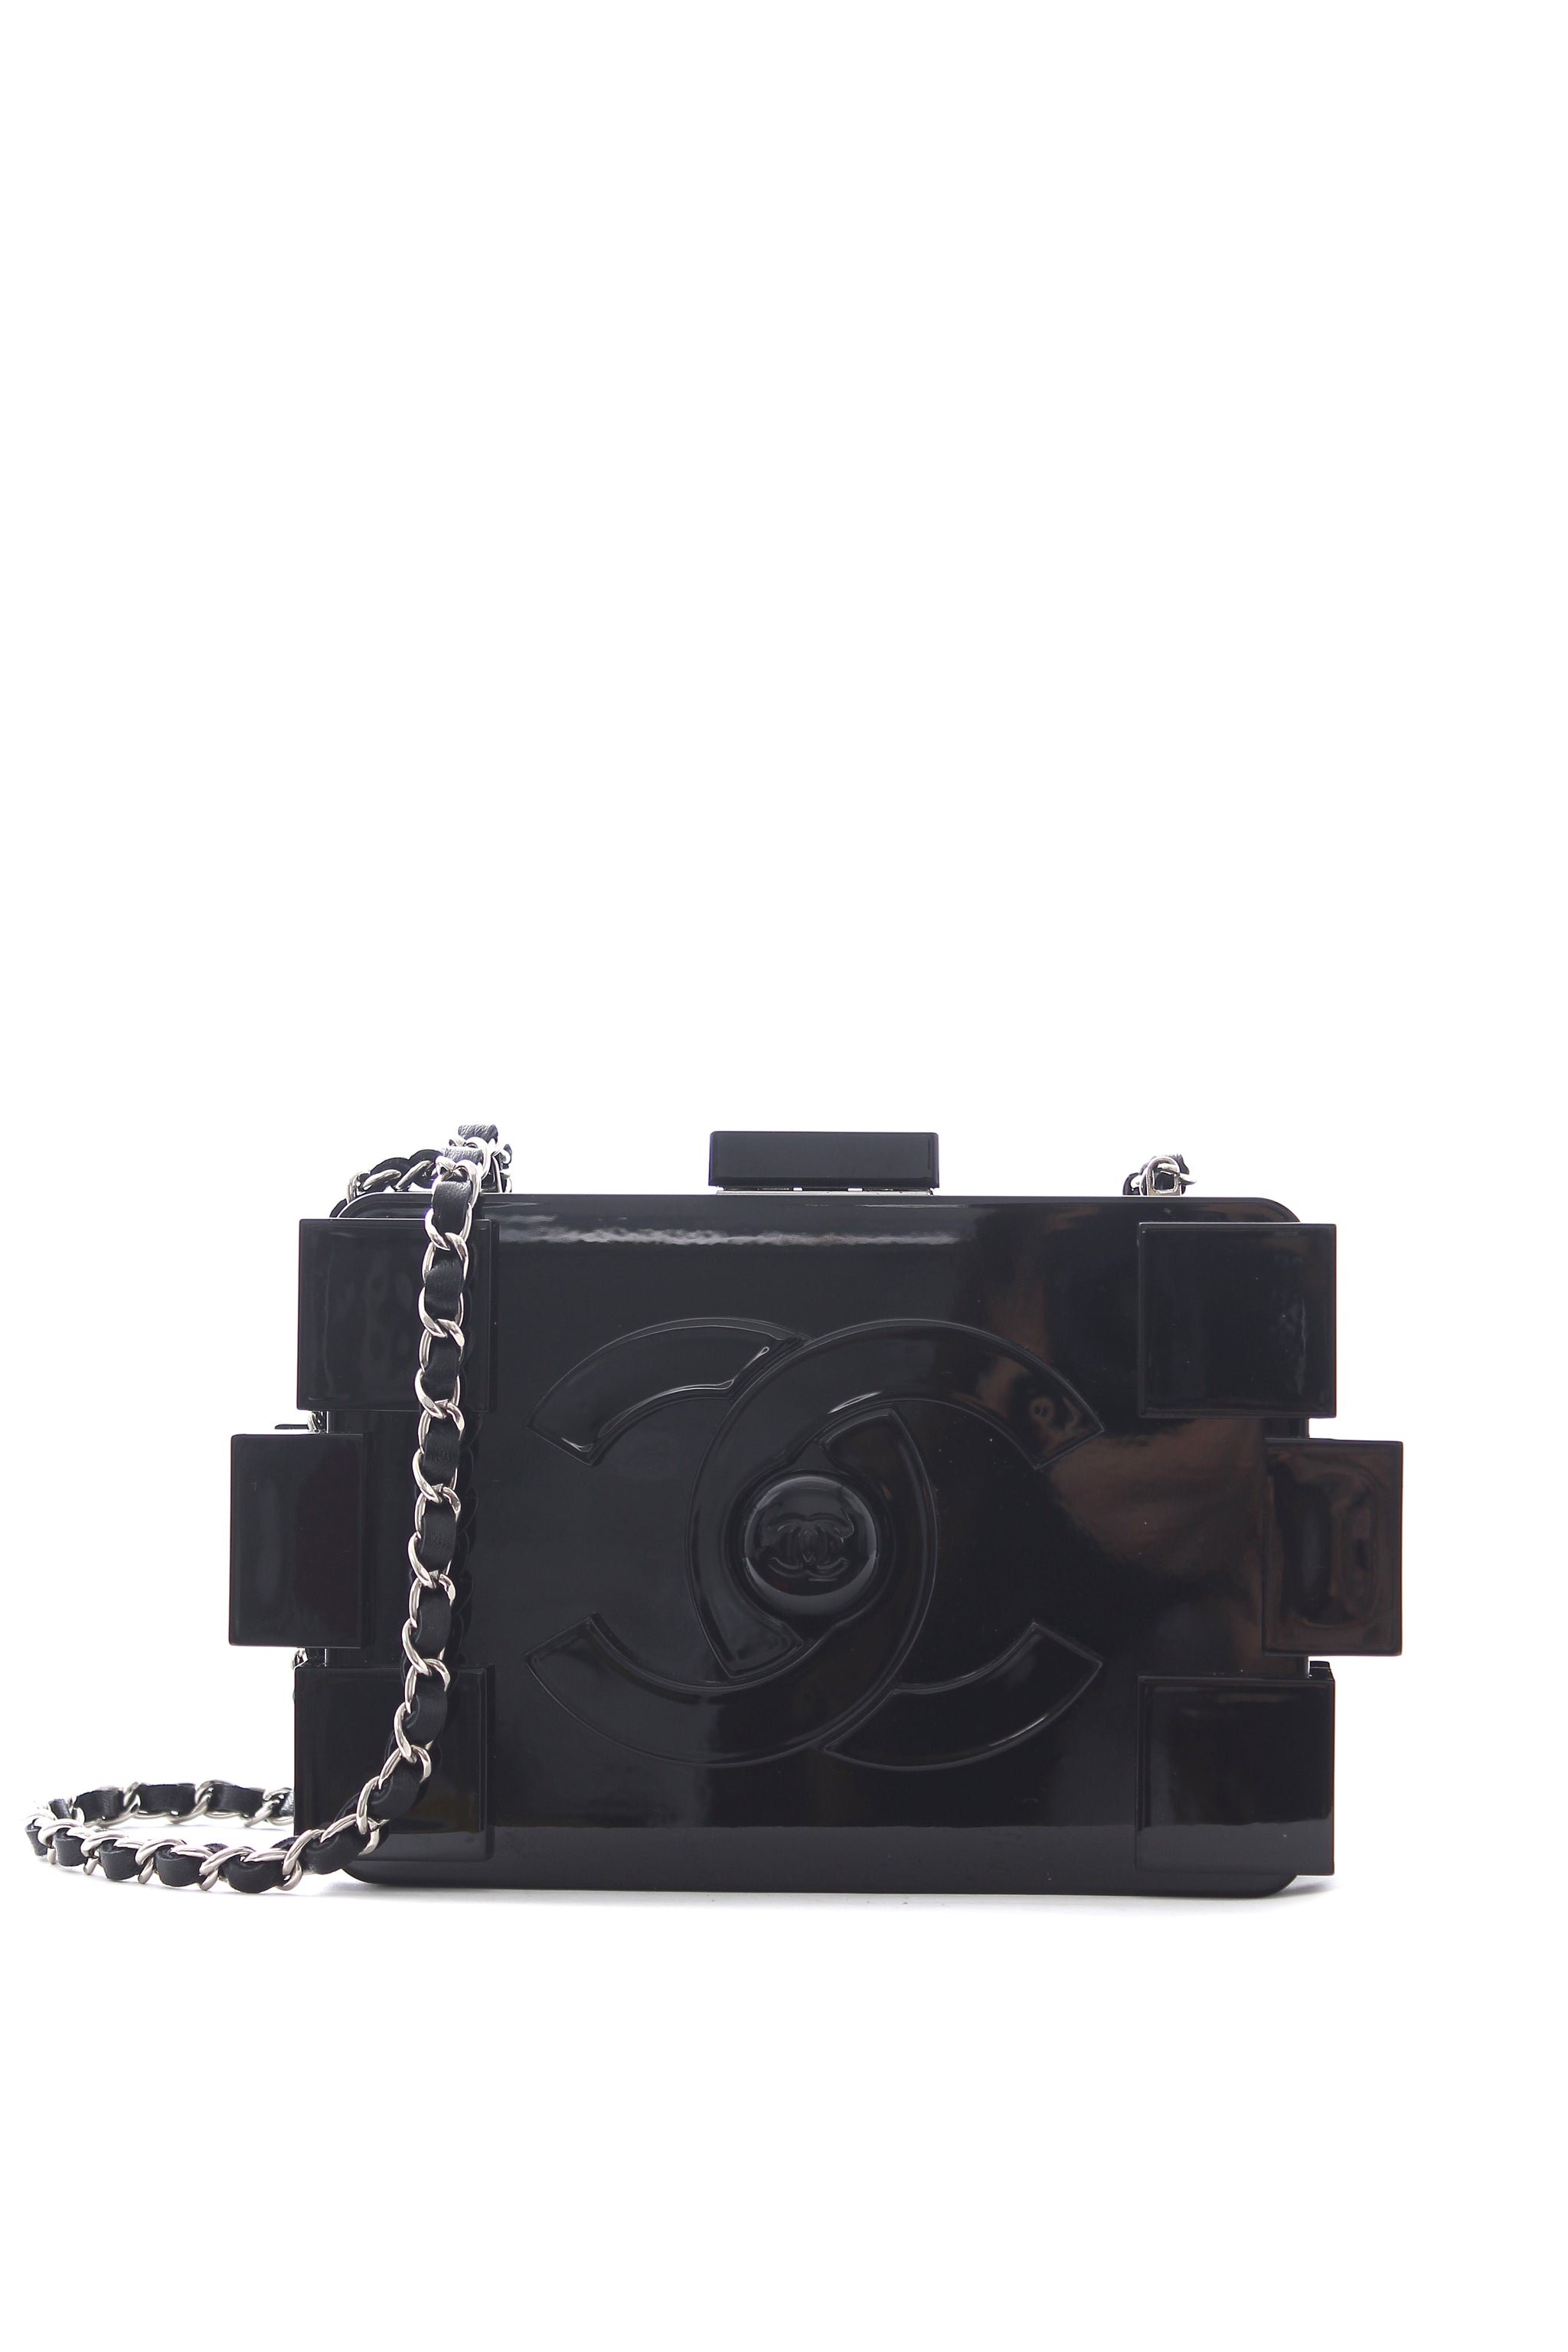 Chanel Runway White Pearl and Black Lego Clutch